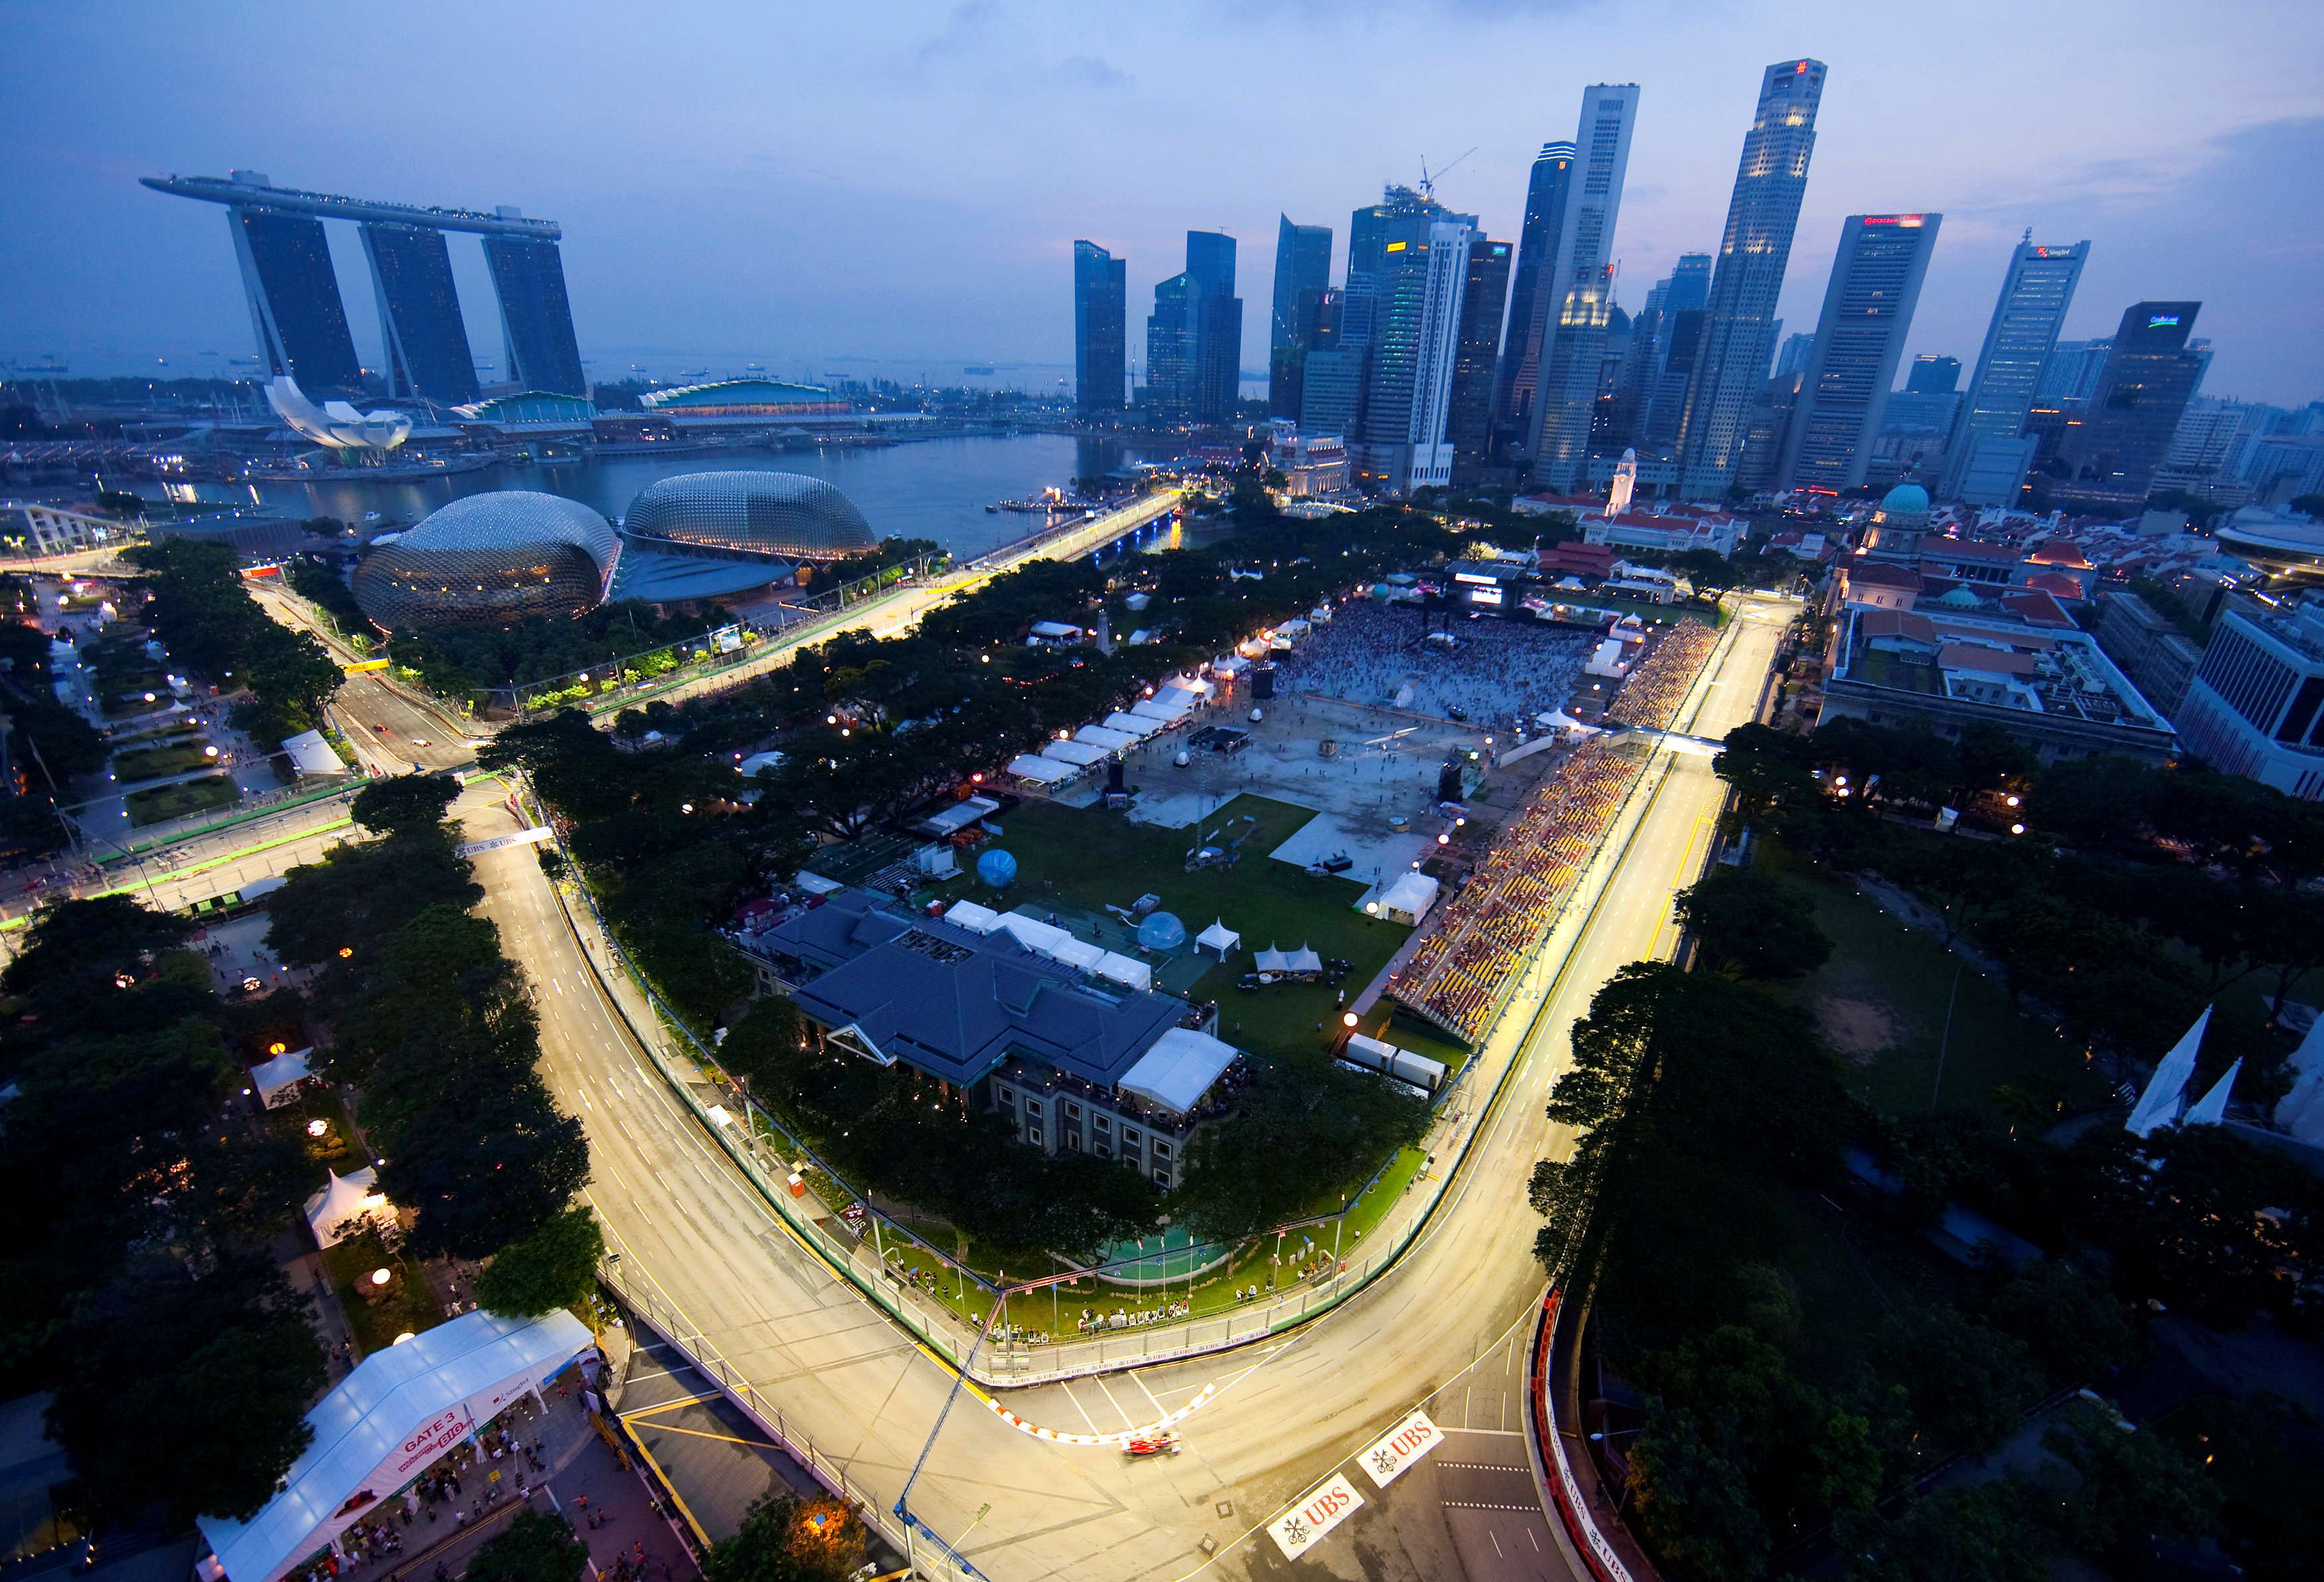 Night racing in Singapore is a key part of the grand prix’s allure. Photo: Reuters